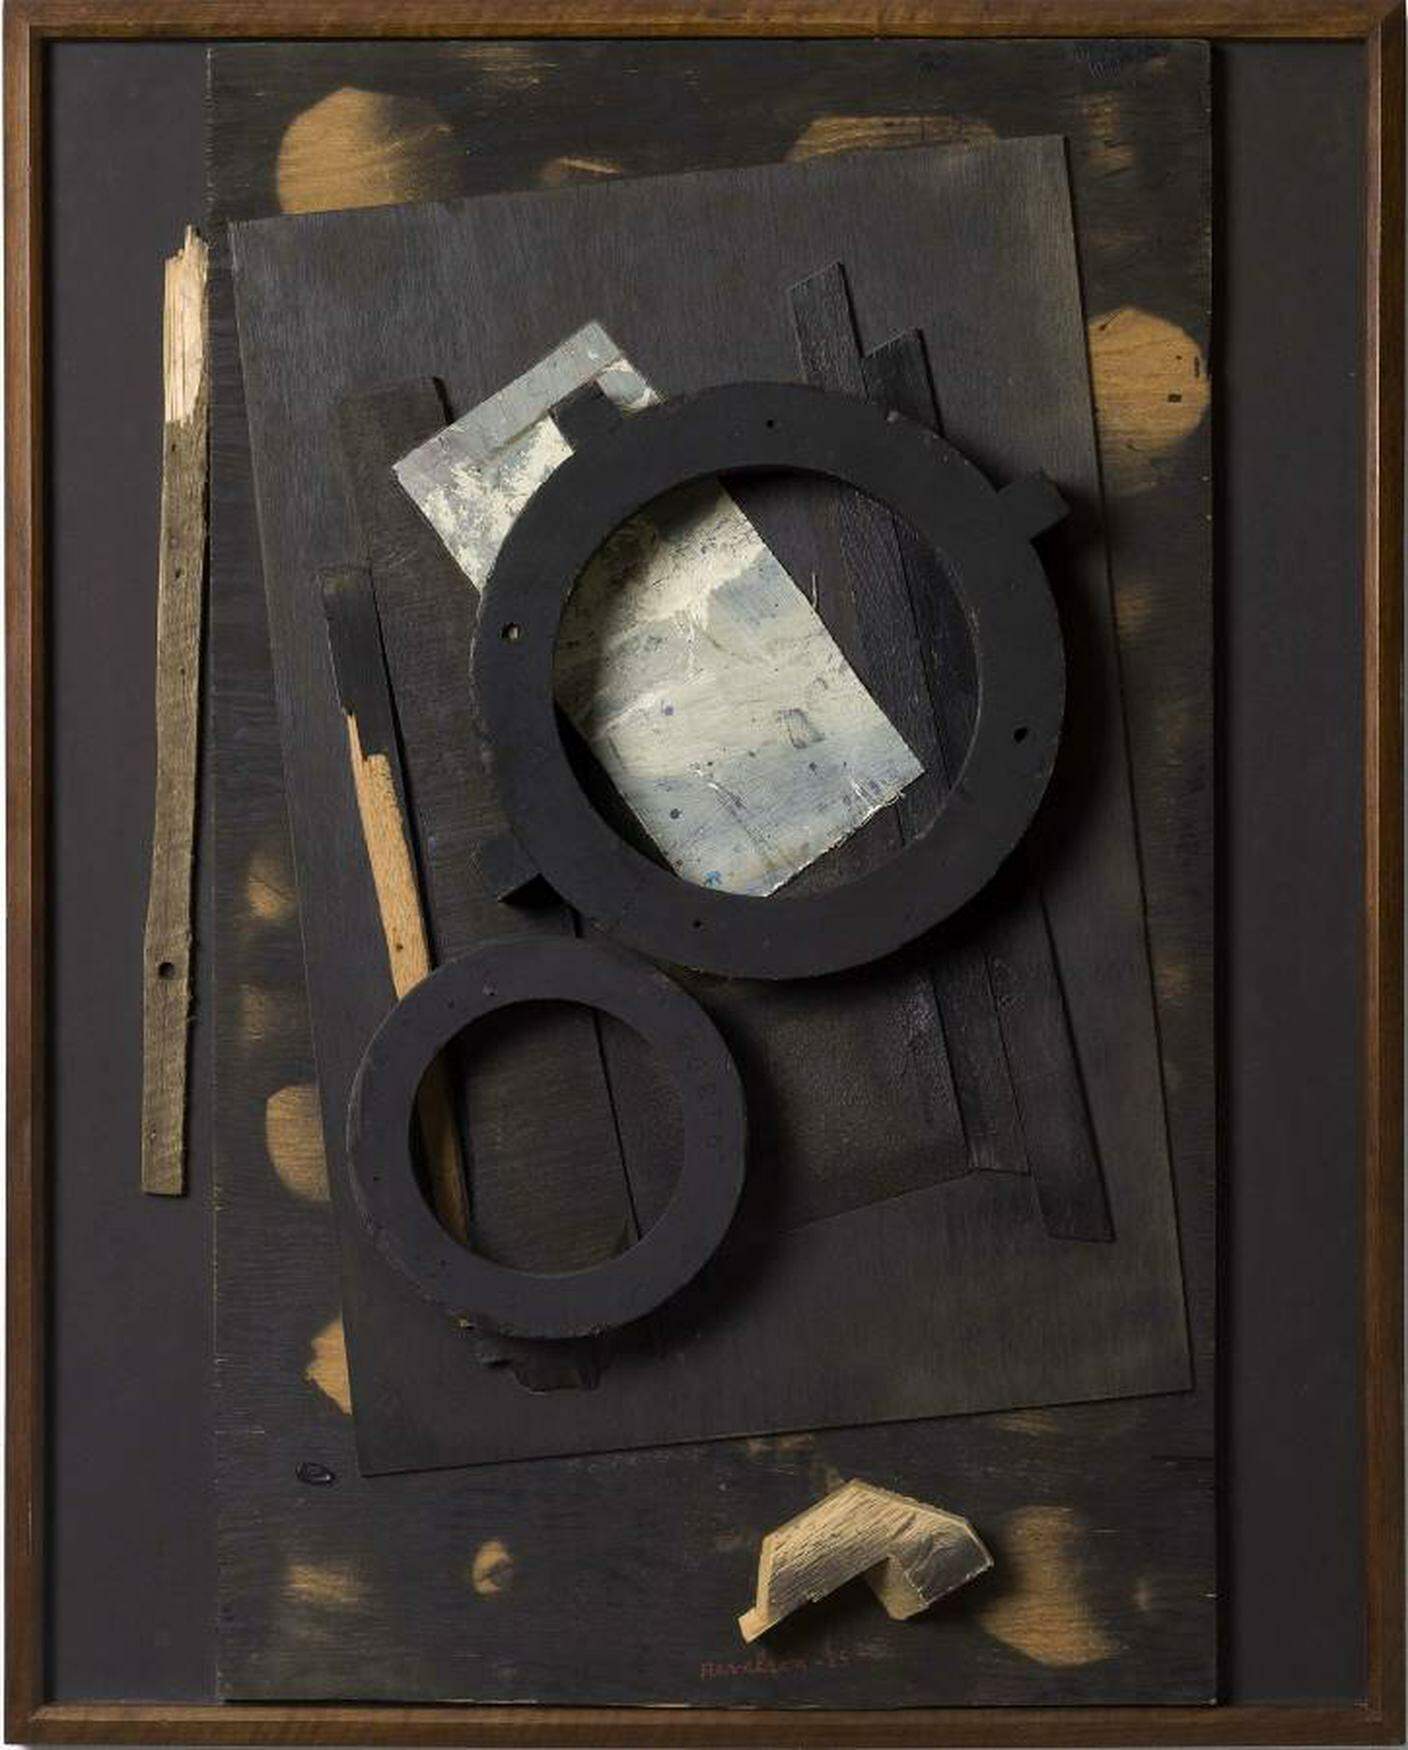 Louise Nevelson, Volcanic Magic XIII, 1985